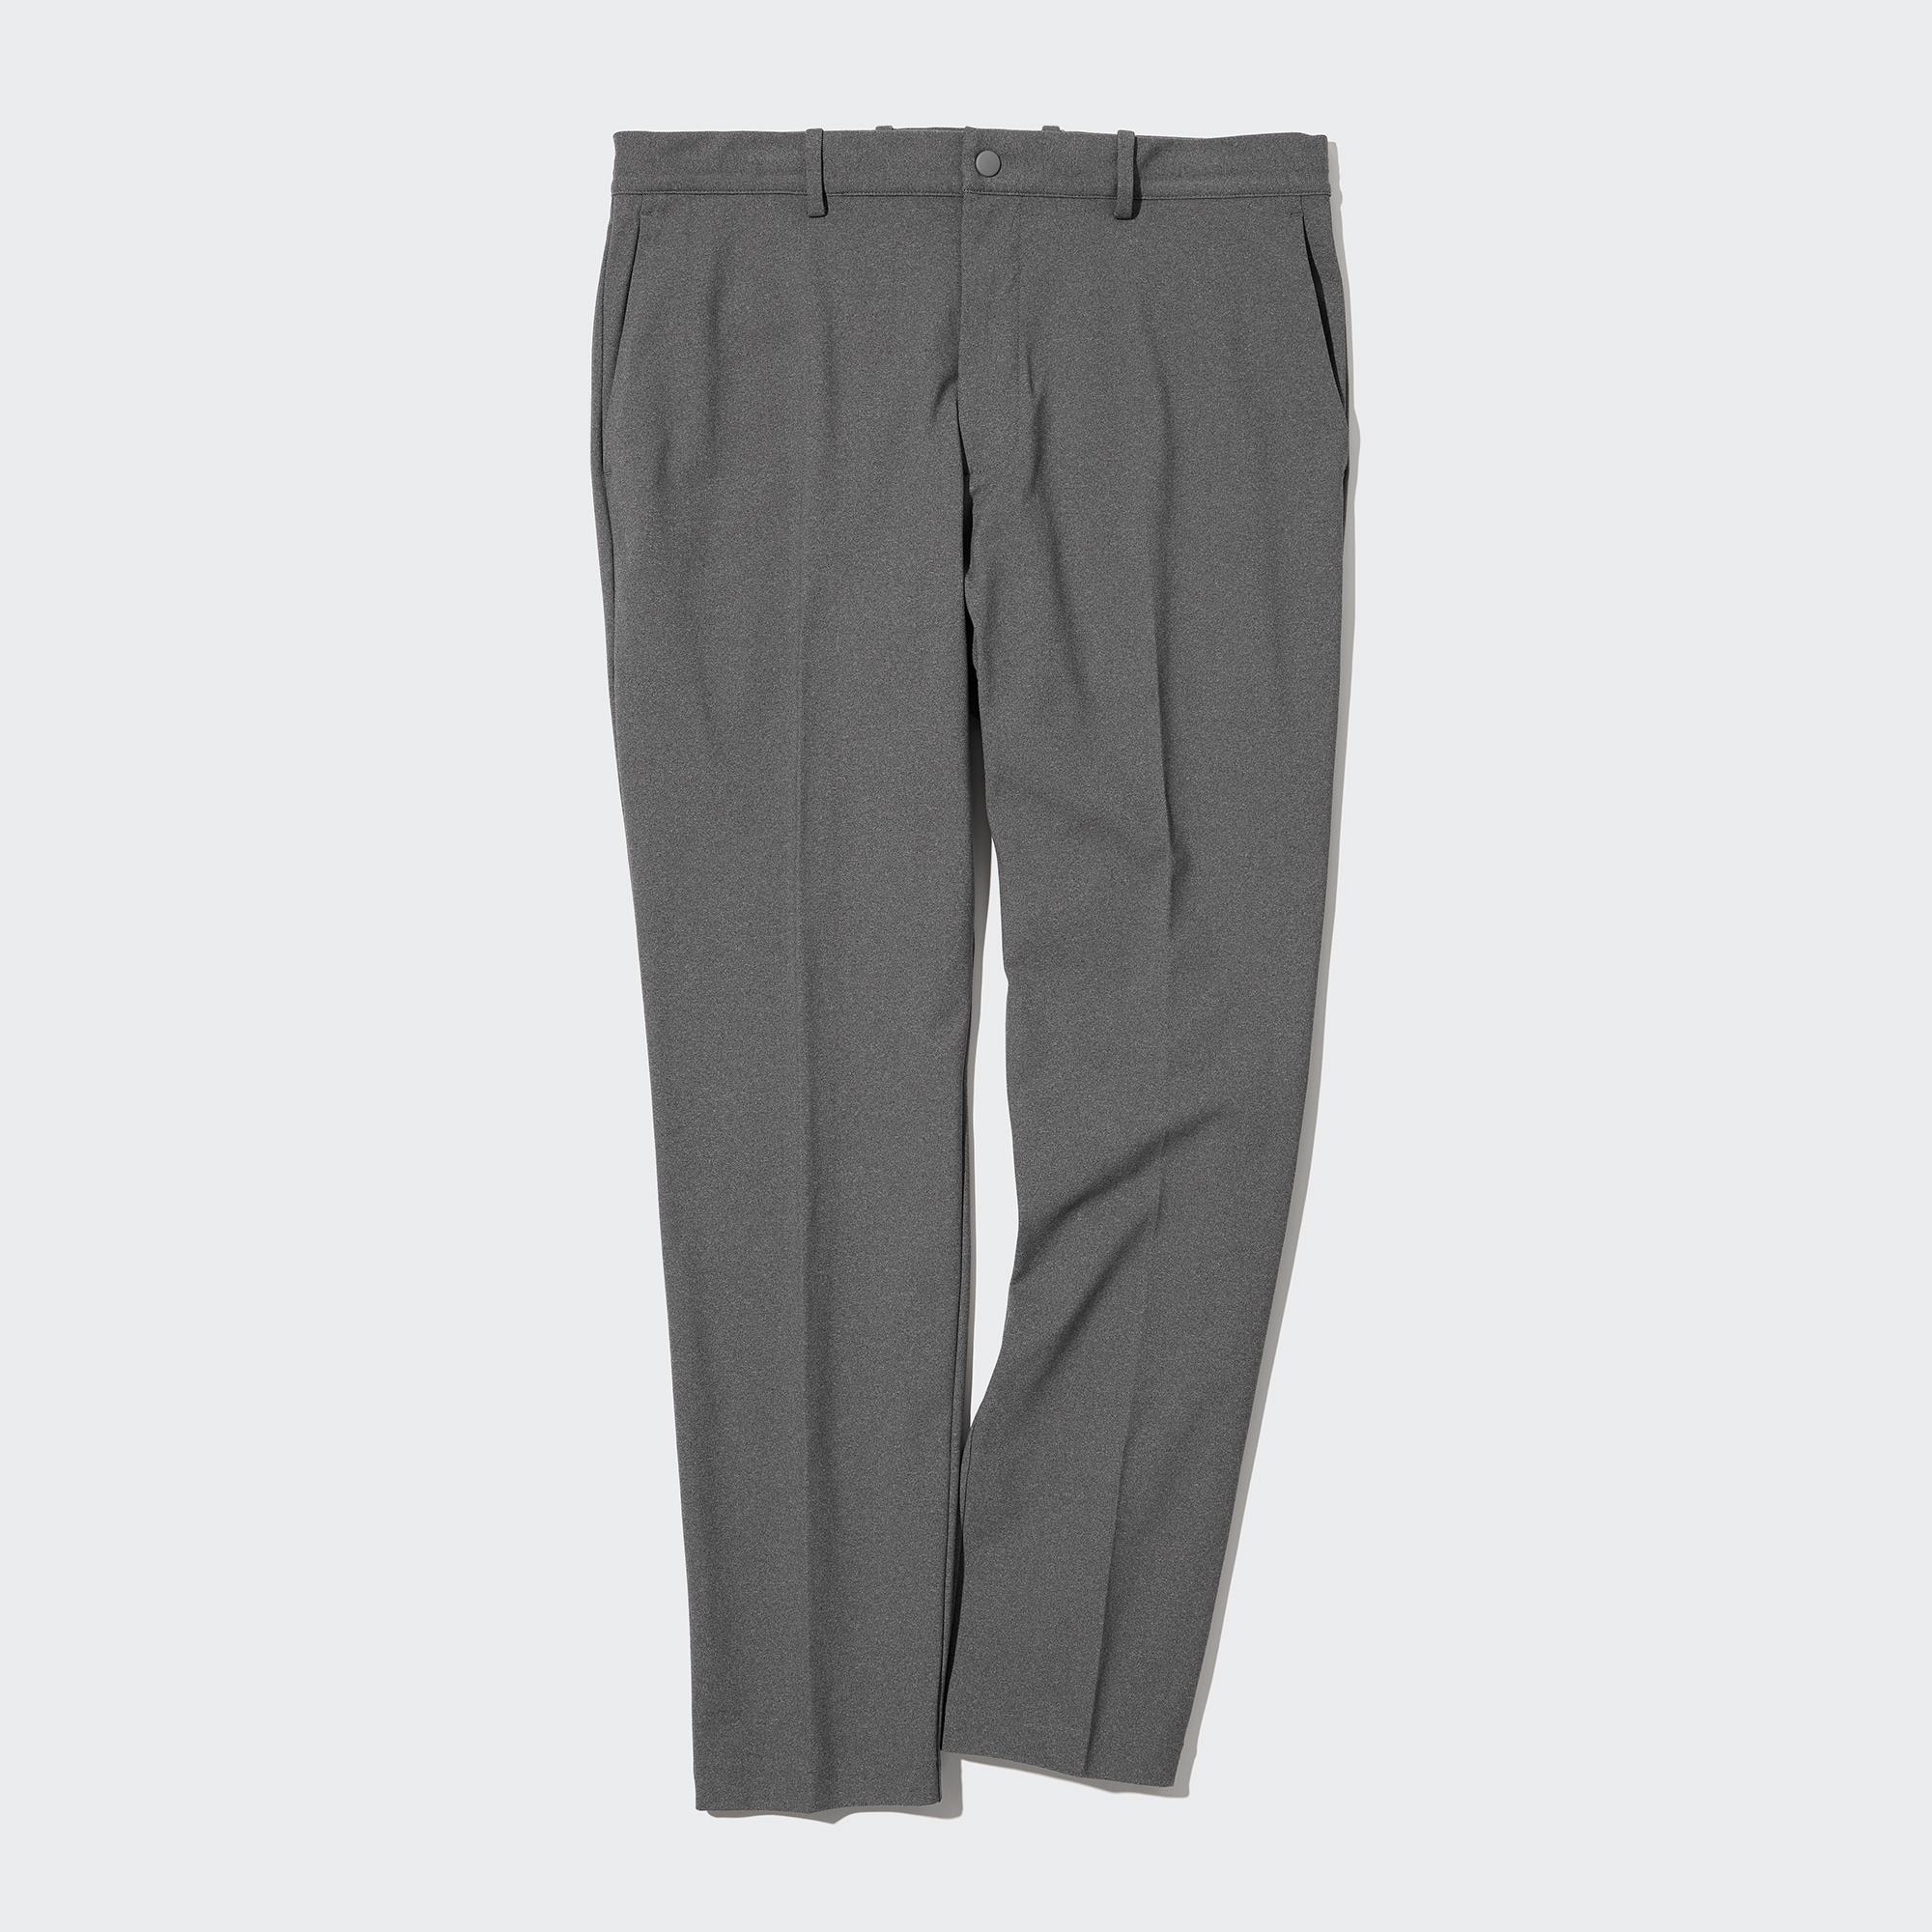 MENS SMART ANKLE PANTS ULTRA STRETCH  UNIQLO VN